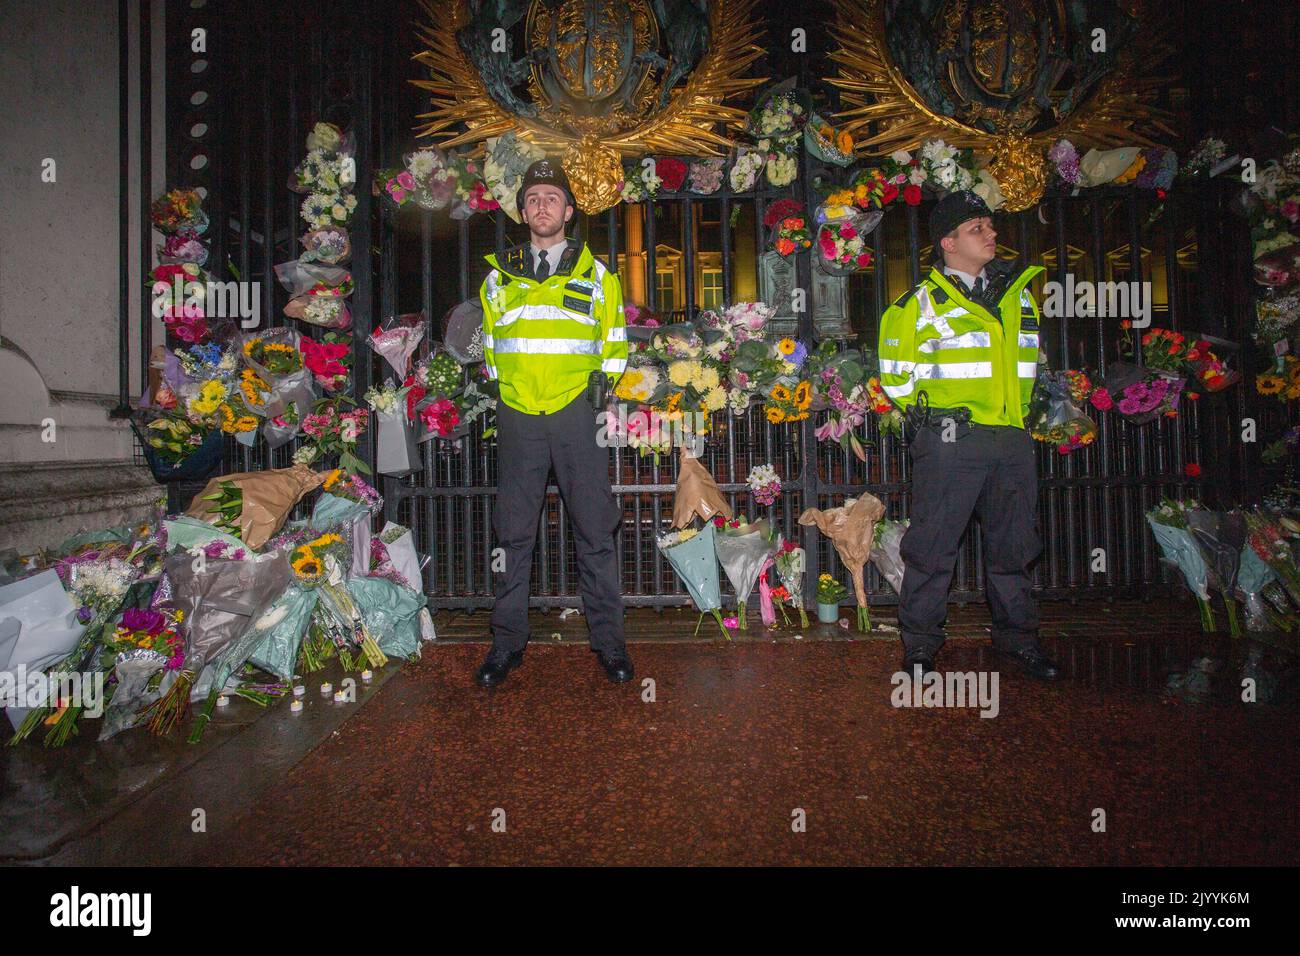 LONDON, ENGLAND - SEPTEMBER 08: Police officers stand amongst floral tributes left outside Buckingham Palace in central London, following the announcement of the death of Queen Elizabeth II,Credit: Horst A. Friedrichs Alamy Live News Stock Photo